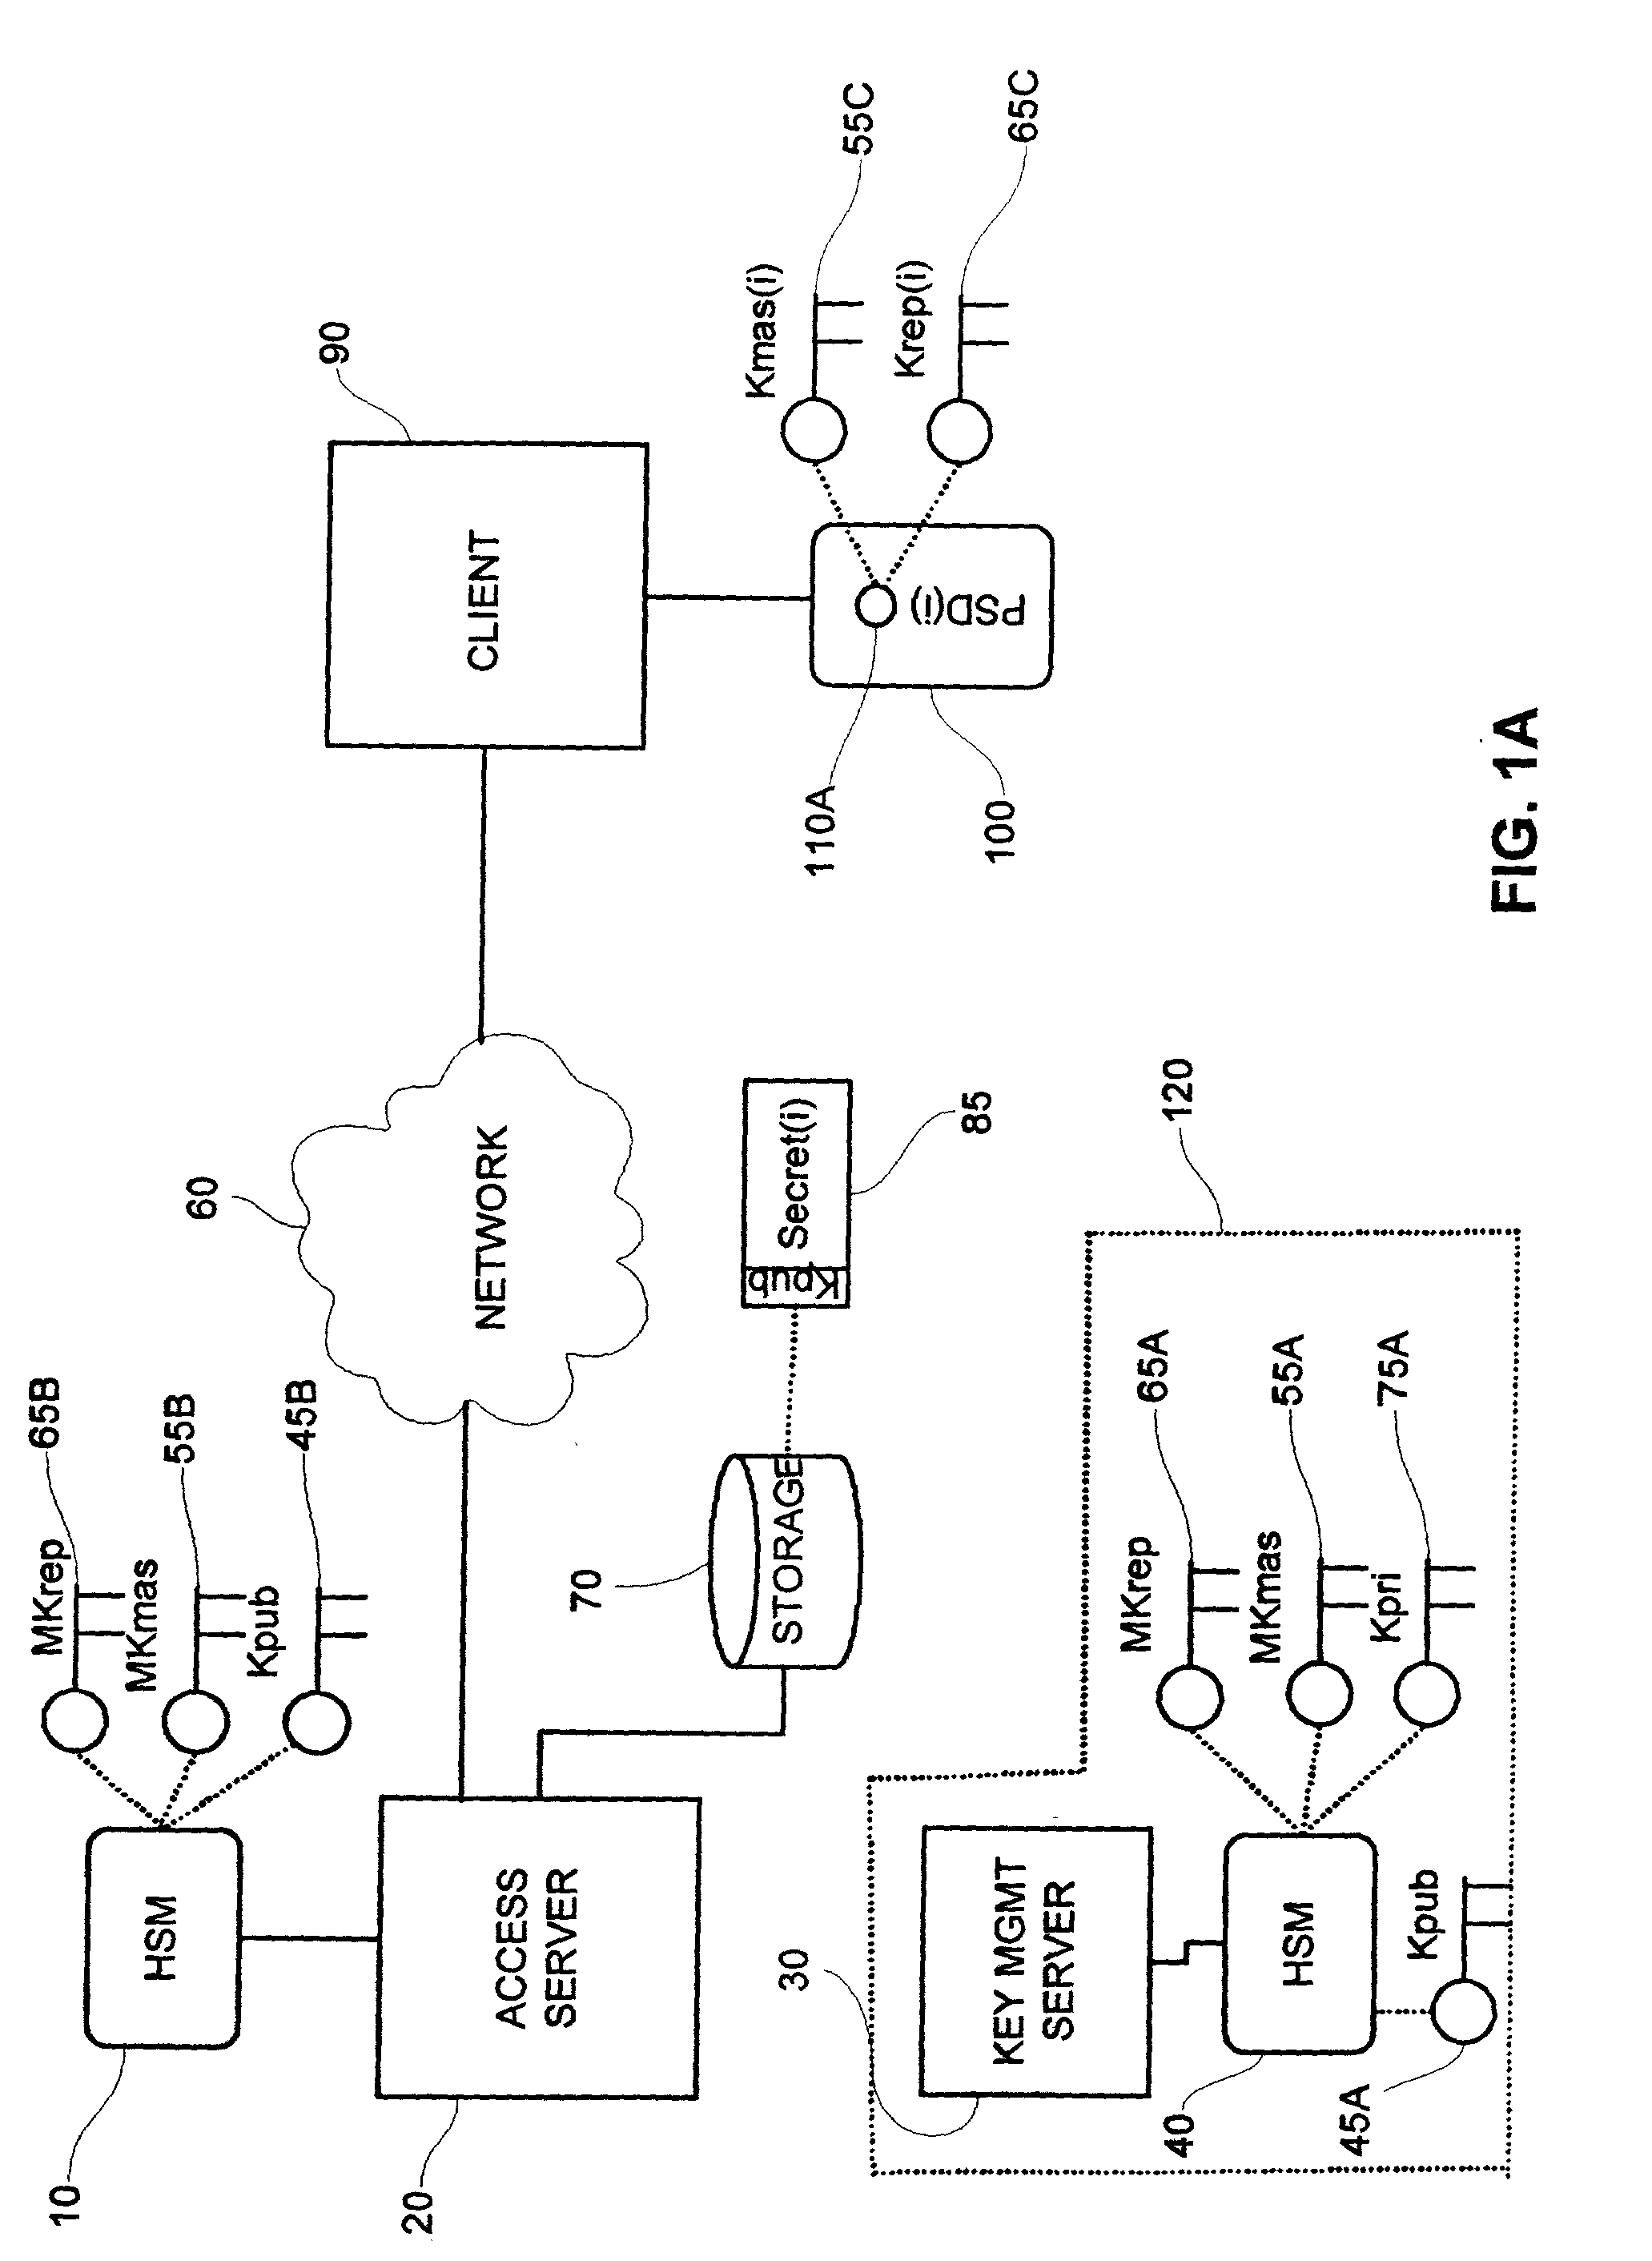 System and method for secure replacement of high level cryptographic keys in a personal security device